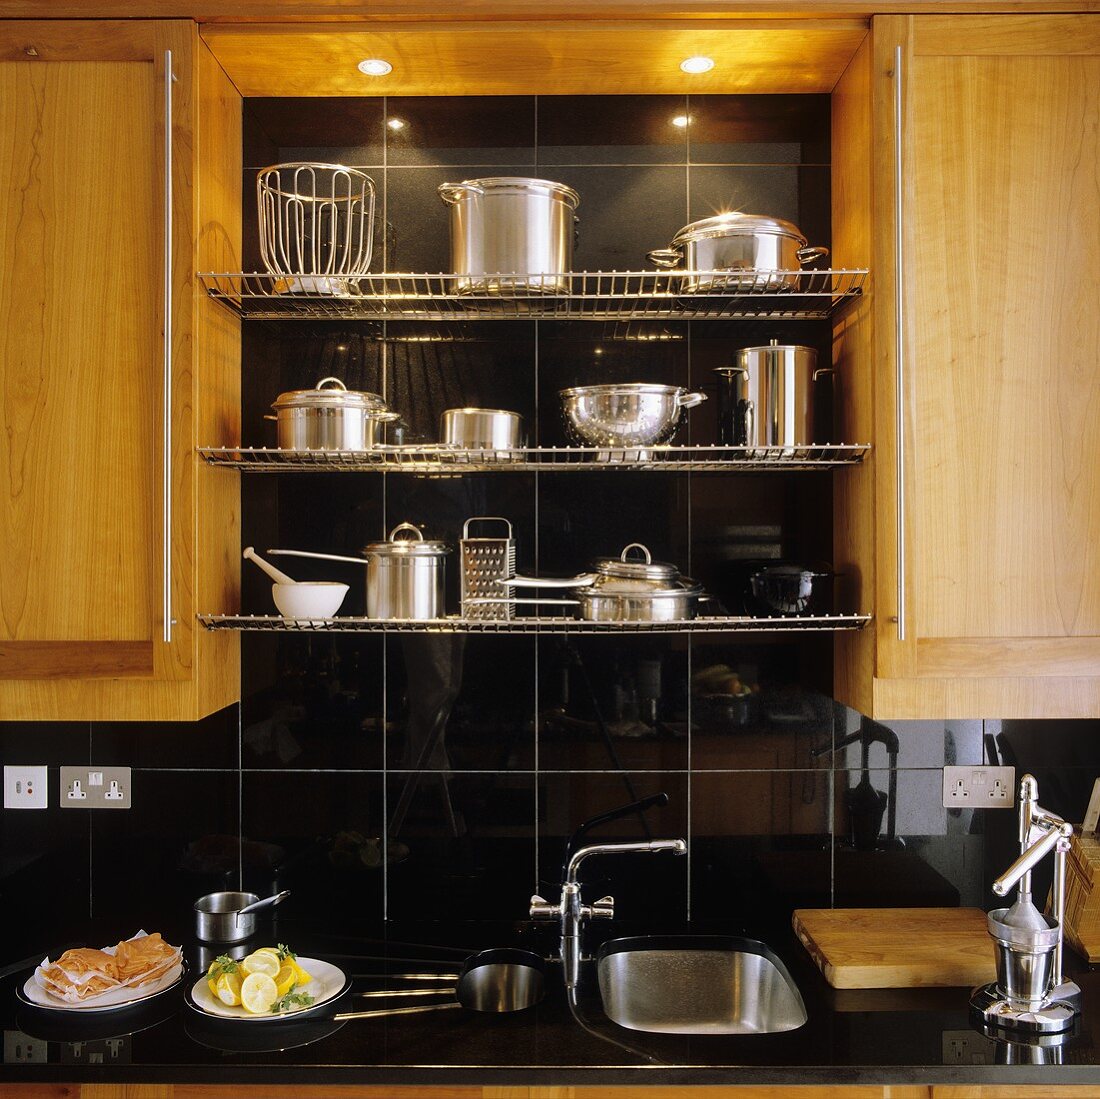 Kitchen cupboards with wooden doors with stainless steel pans on a wire shelf in a black-tiled niche